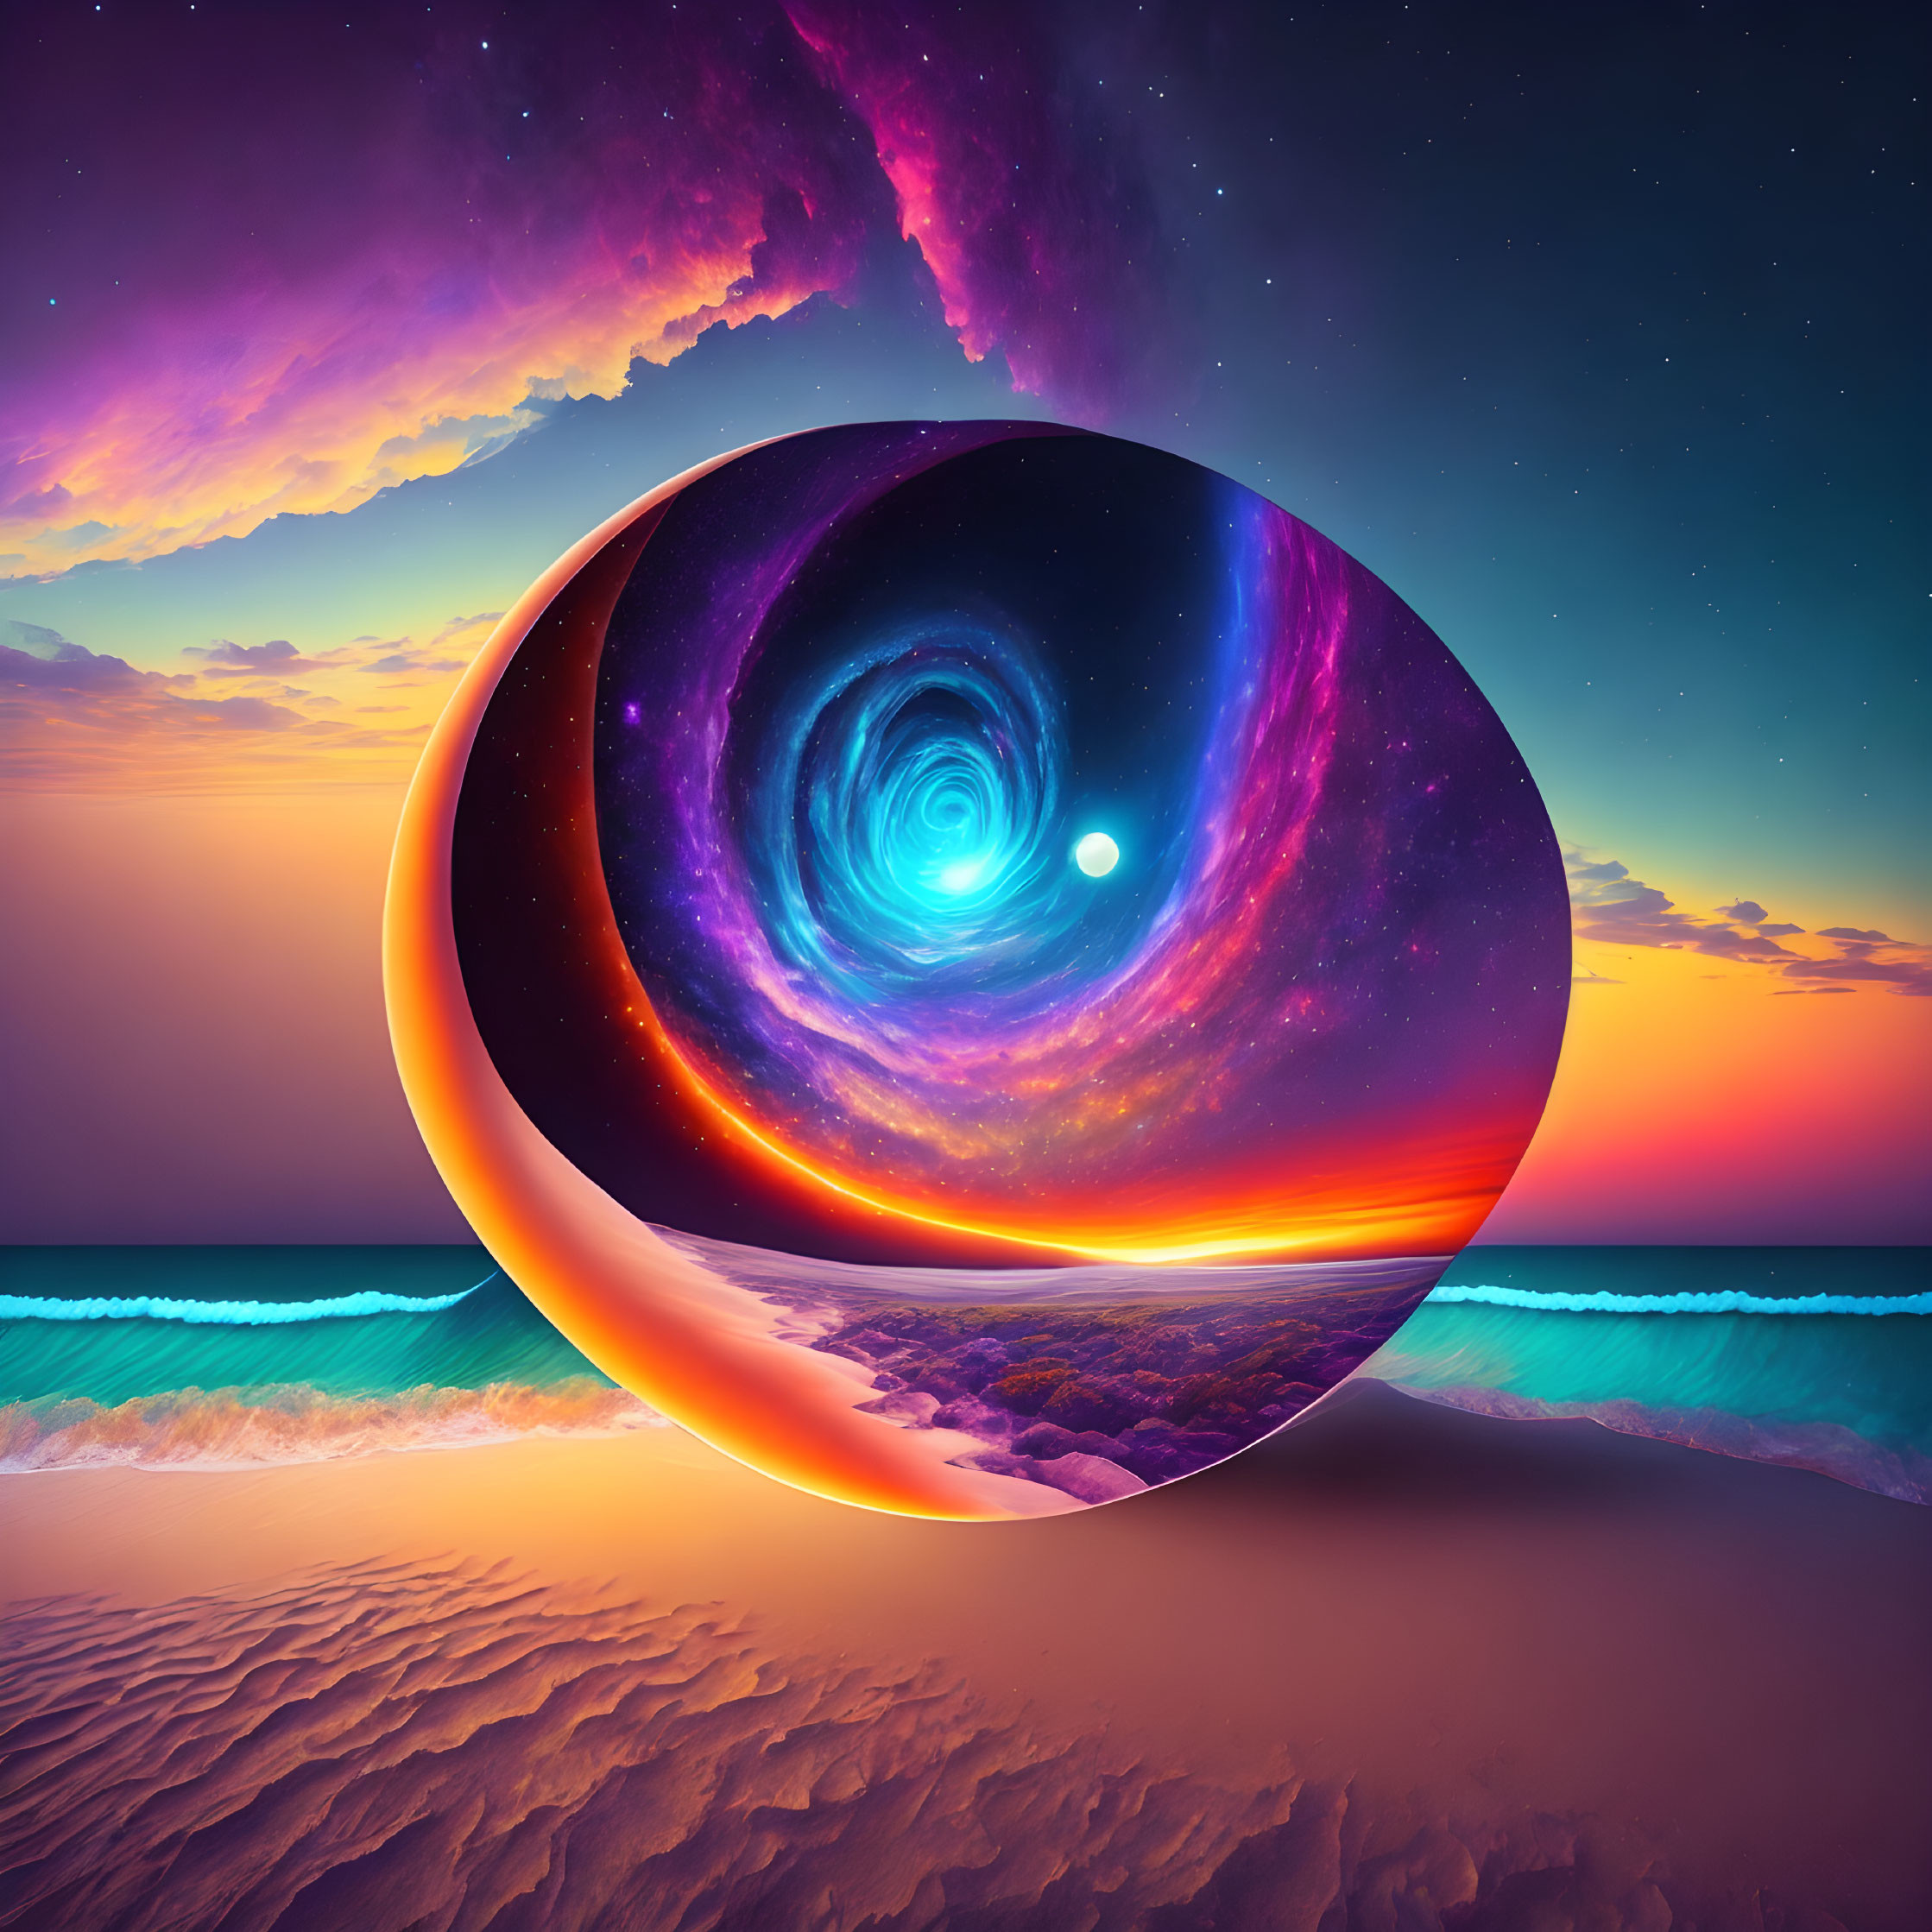 Surreal Beach Landscape with Galaxy Portal at Sunset